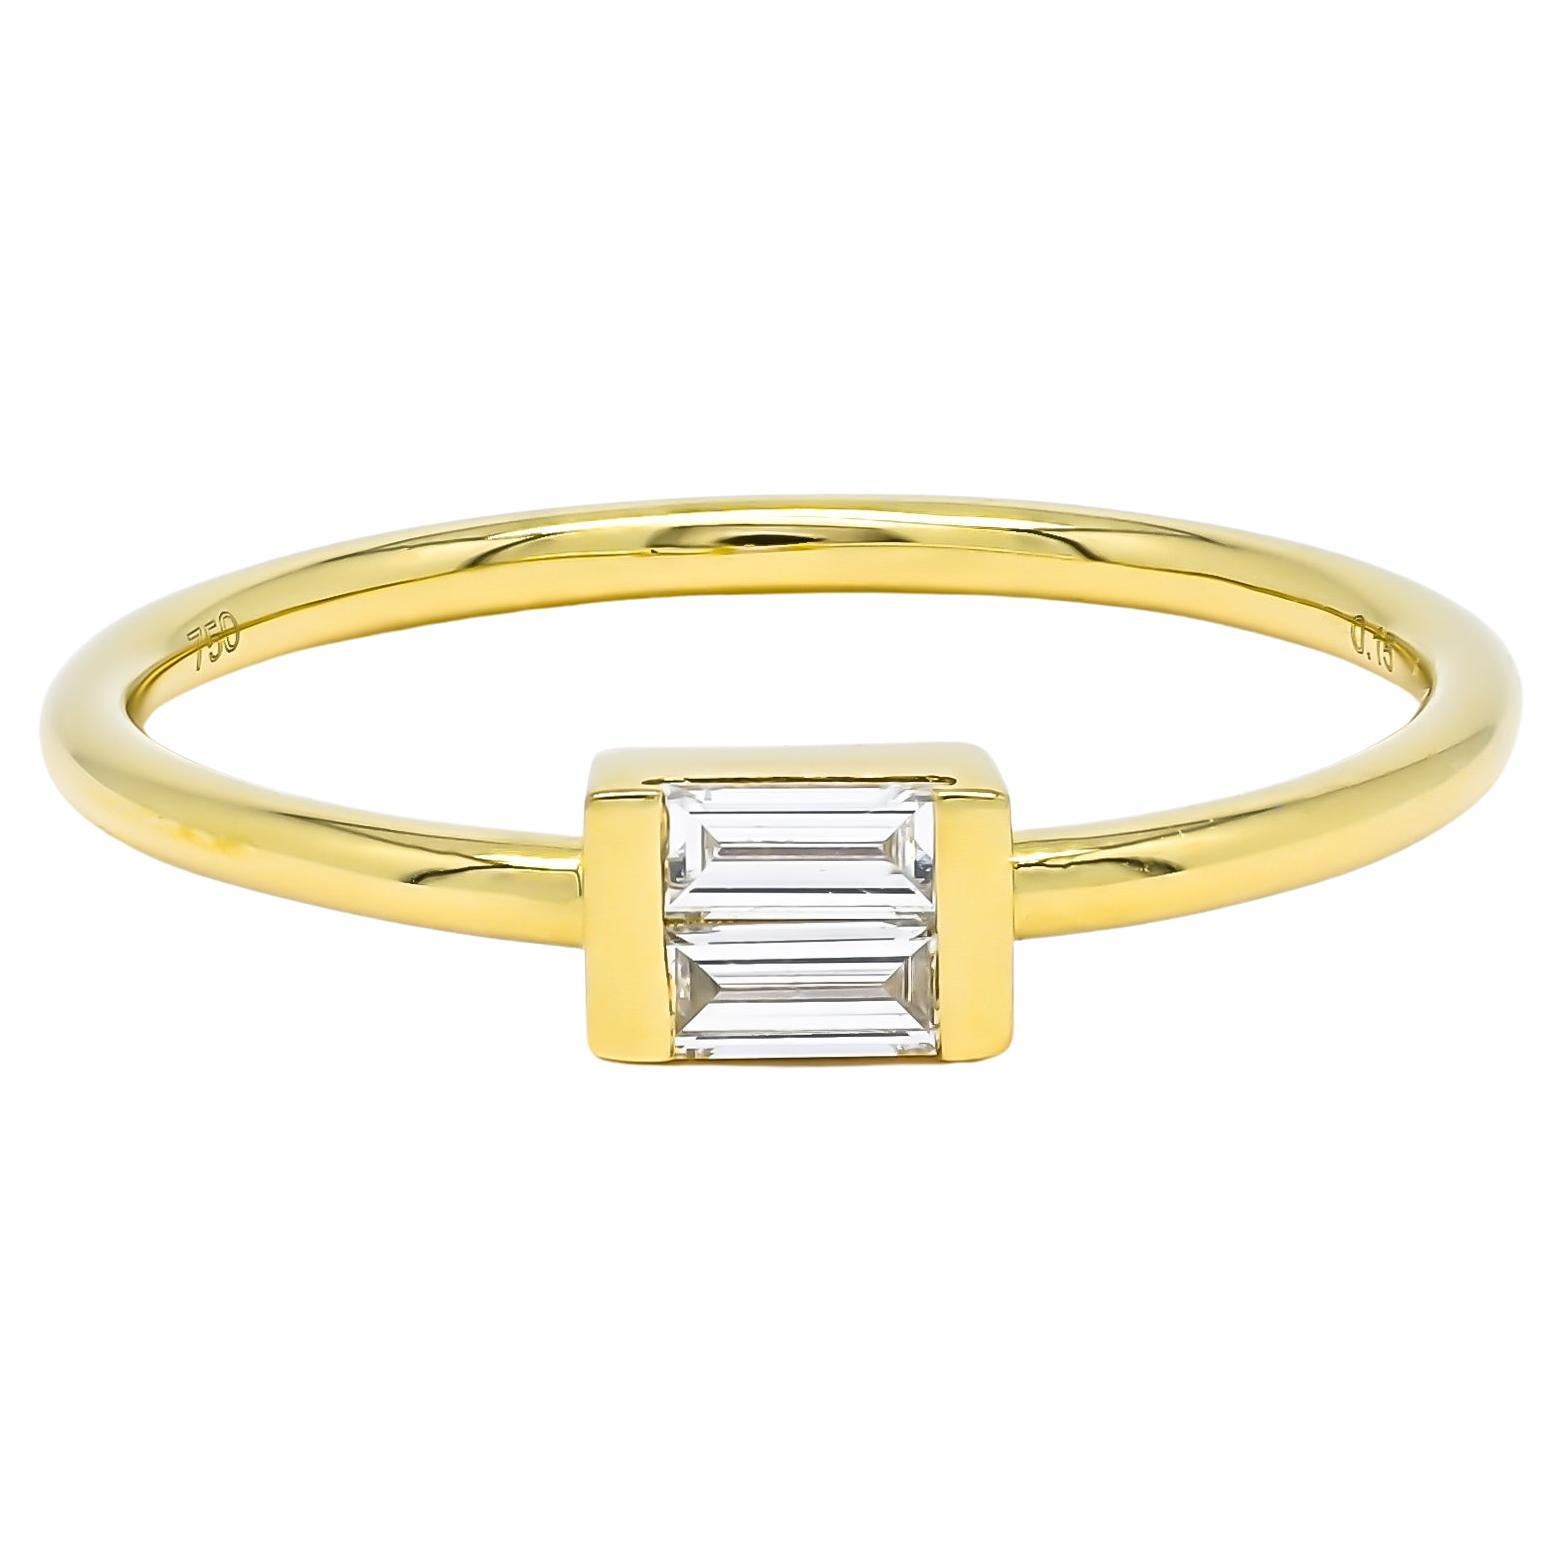 18KT Yellow Gold Baguette Diamonds Bar Illusion Set Stackable Anniversary Ring